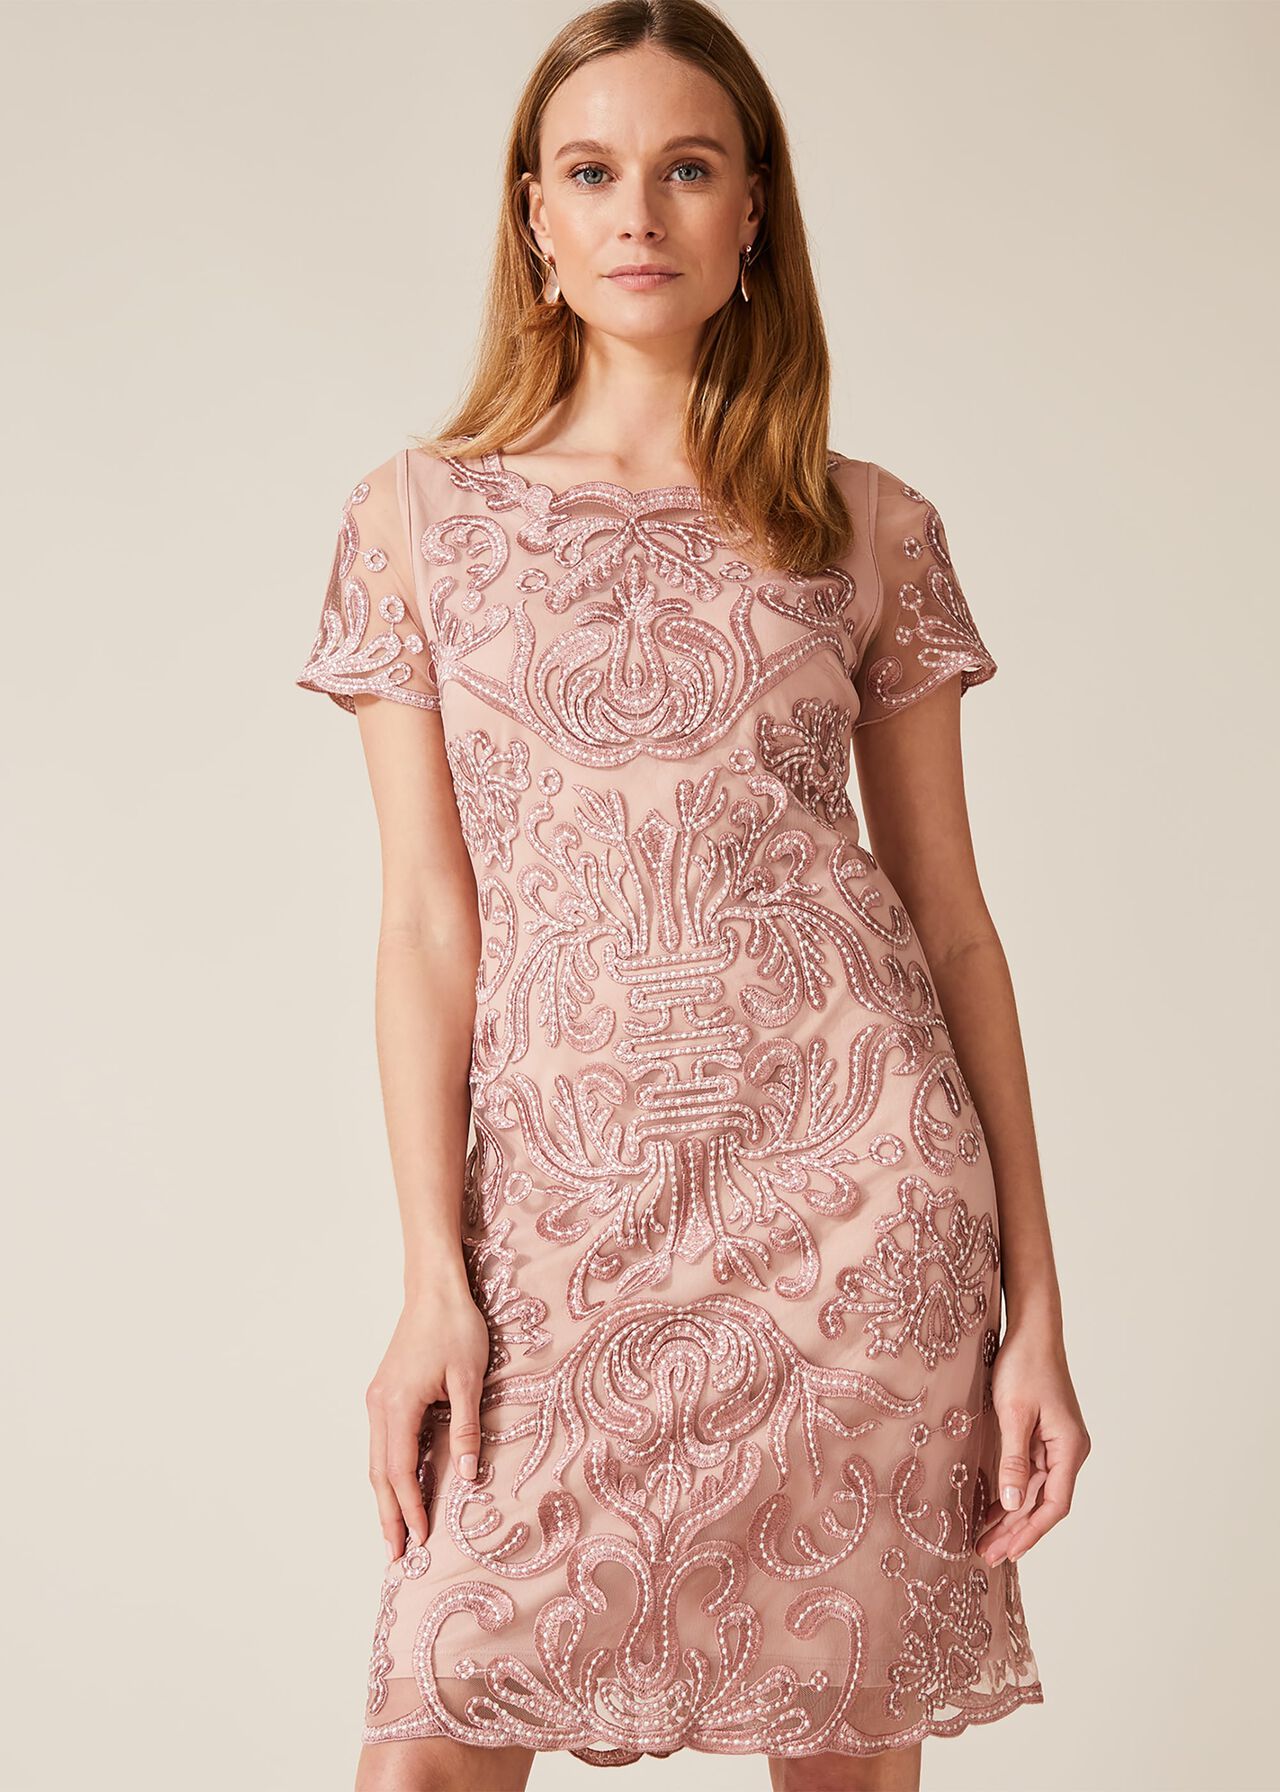 Talia Embroidered Dress | Phase Eight